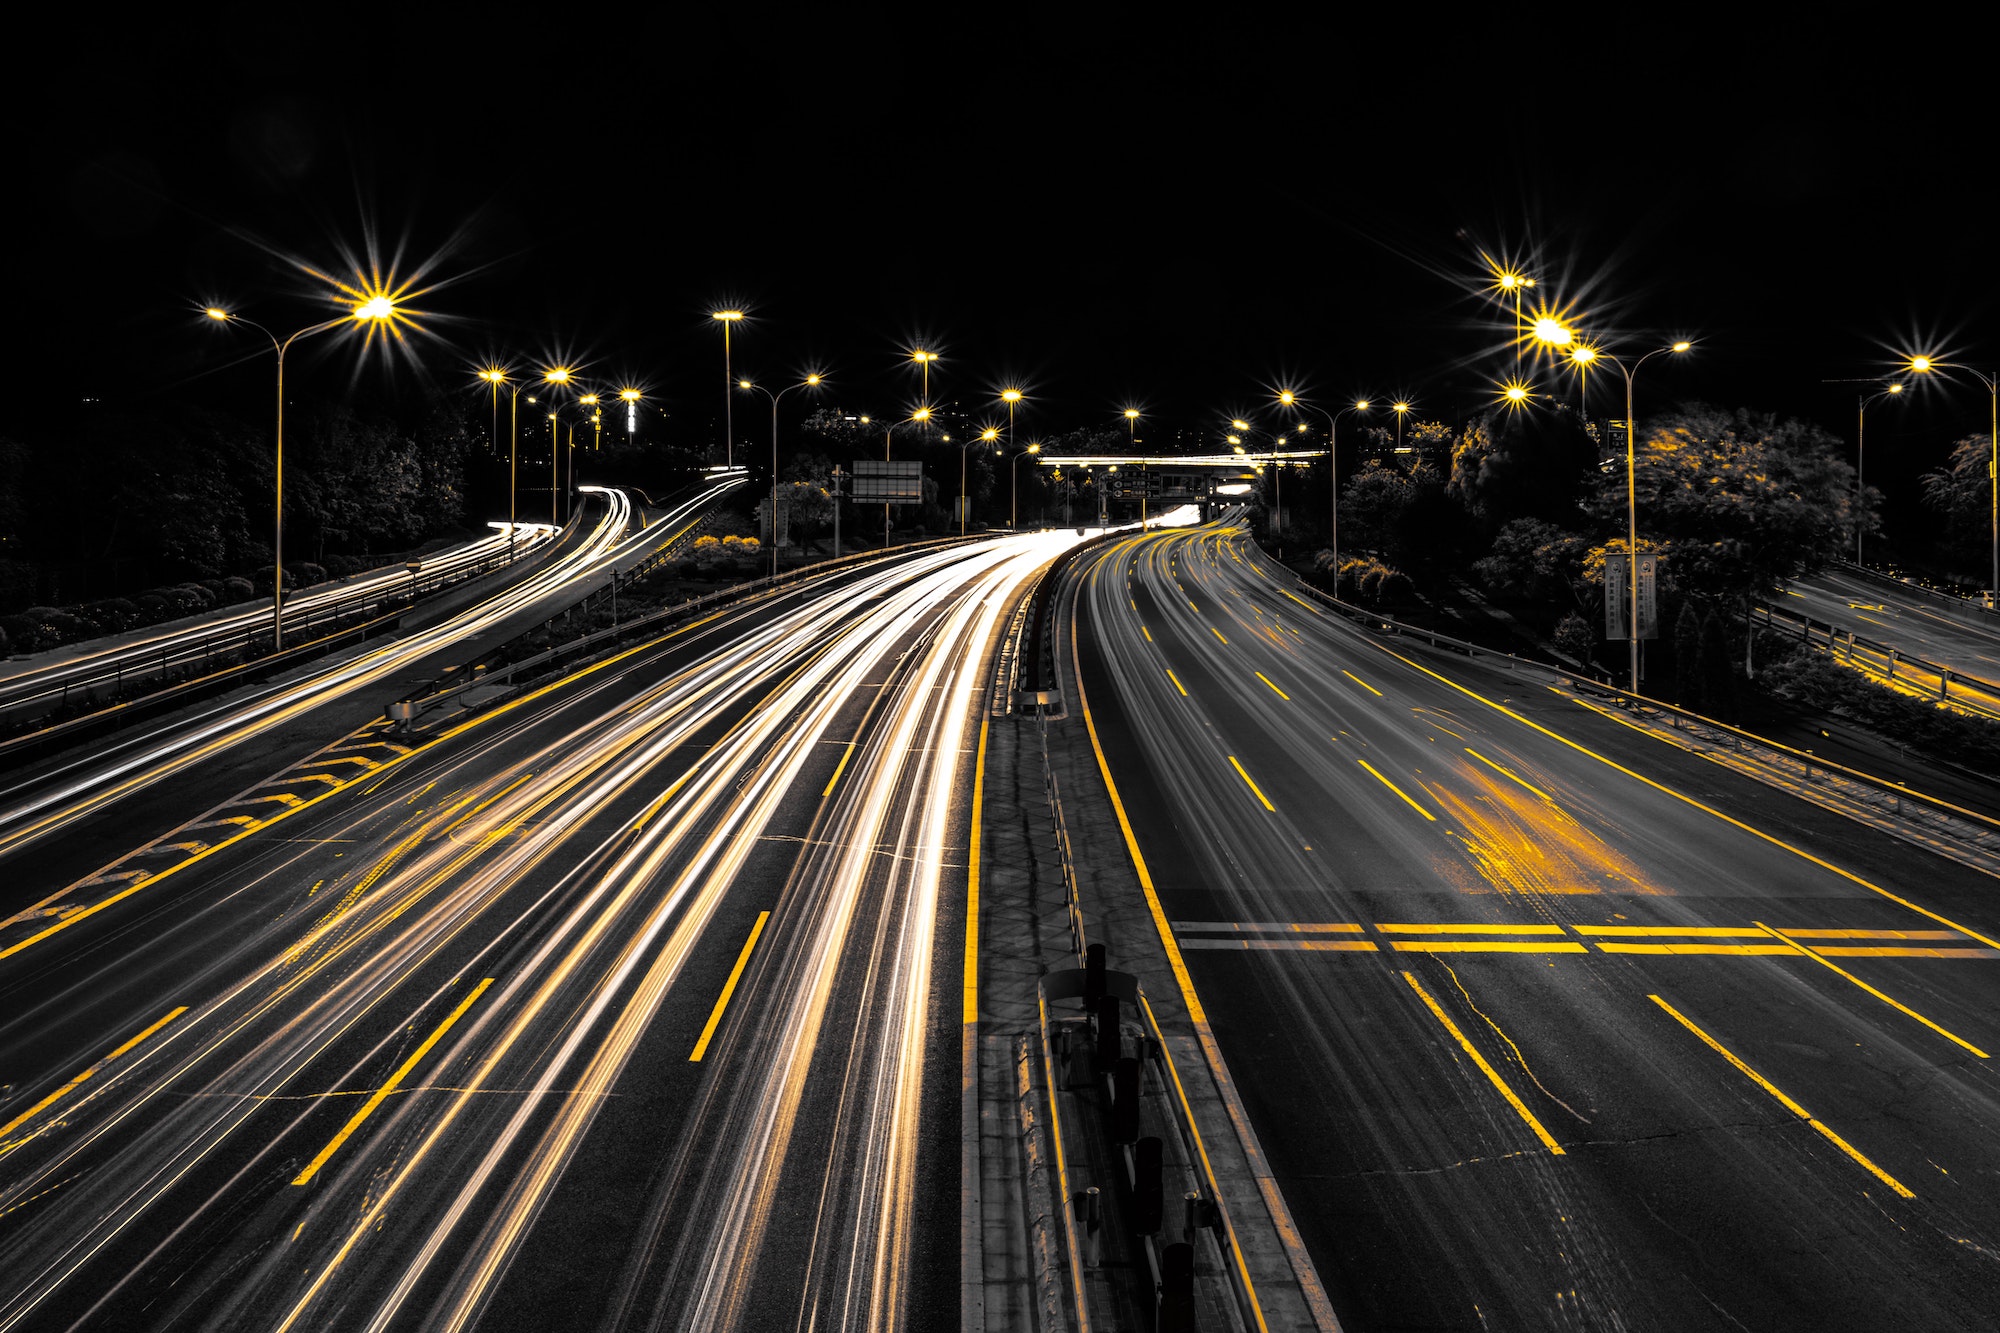 Long-exposure showing streaks of cars on highway at night, demonstrating speed provided by hyperautomation and automating ap